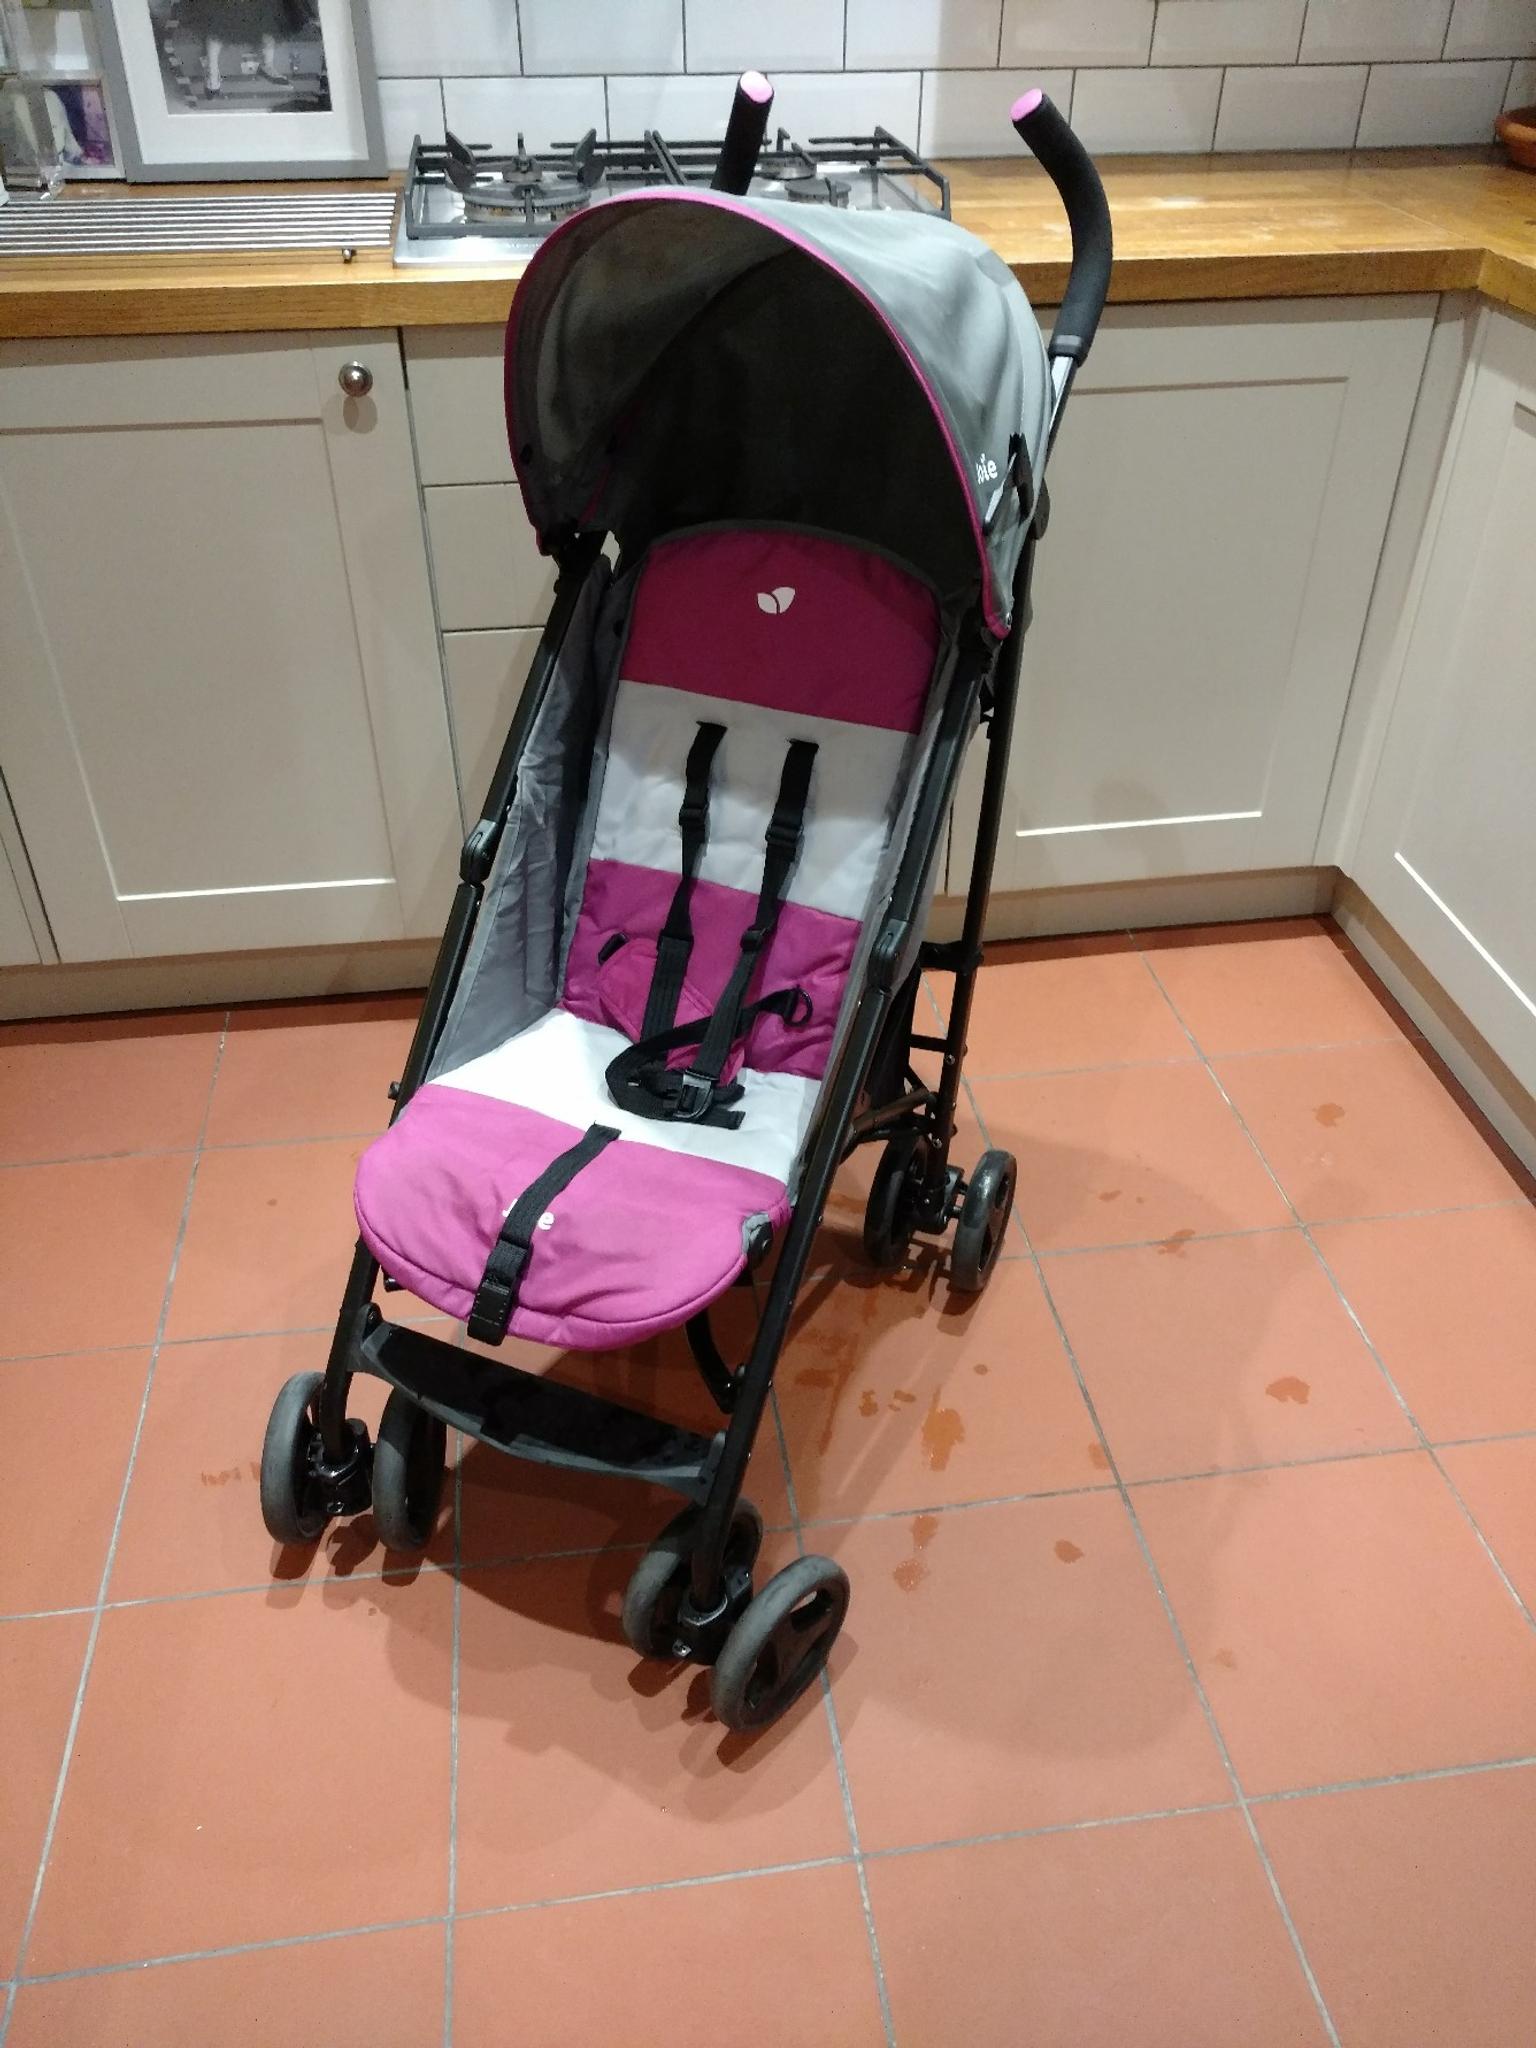 joie stroller pink and grey